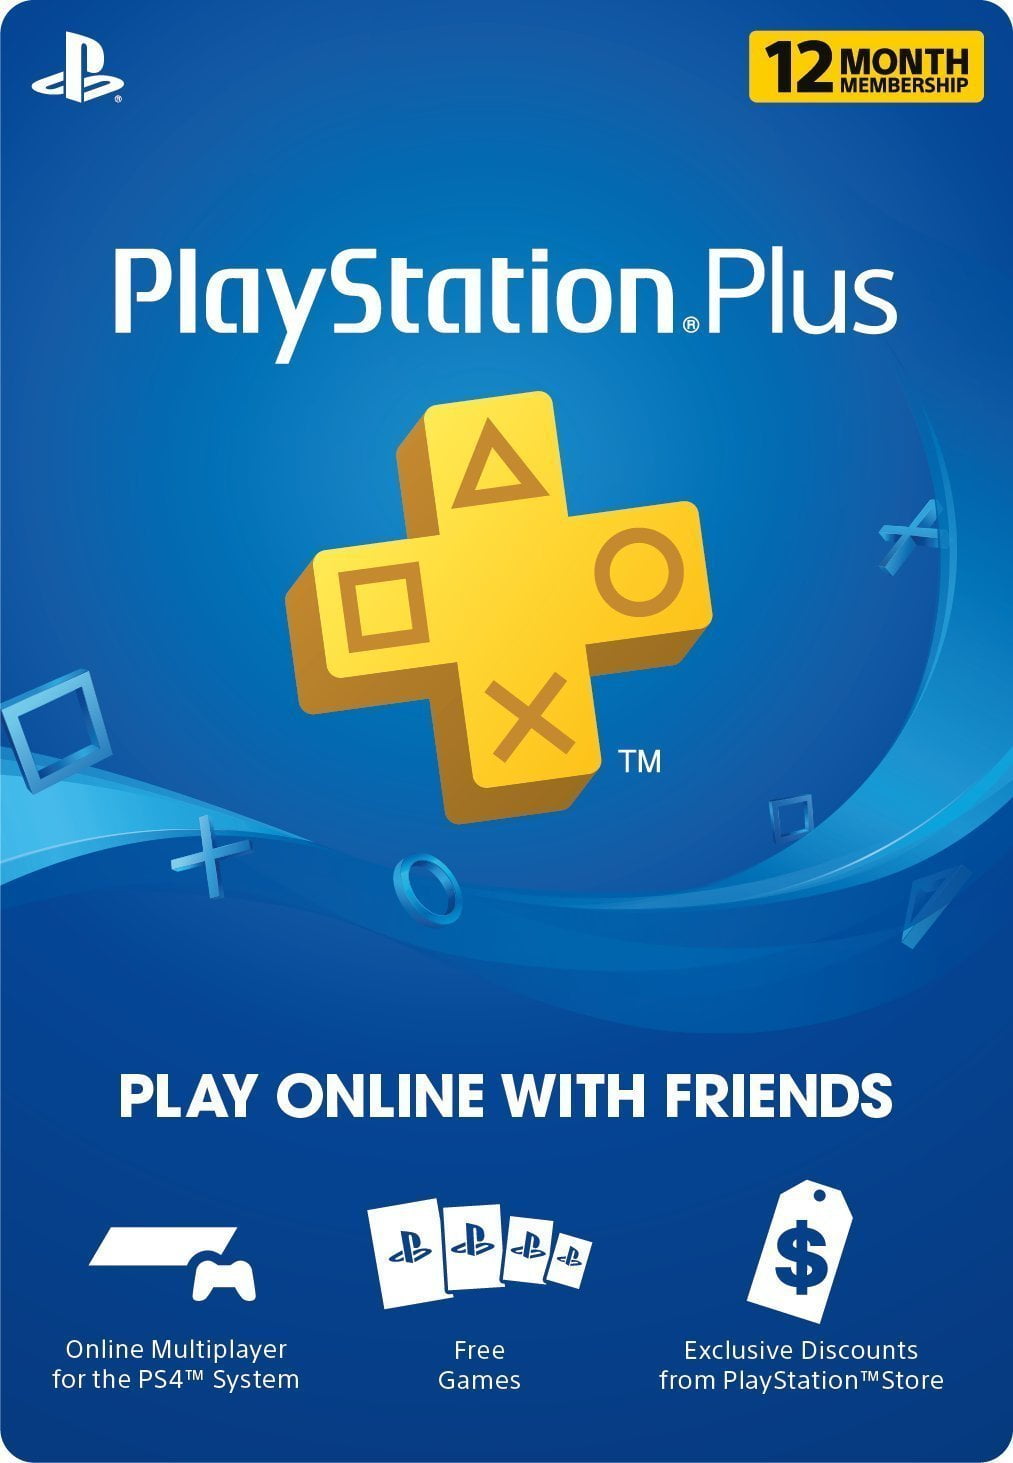 Sony - PSN Live Subscription Card 12 Month Membership for PlayStation 3/PlayStation 4/PlayStation Vita - Walmart.com